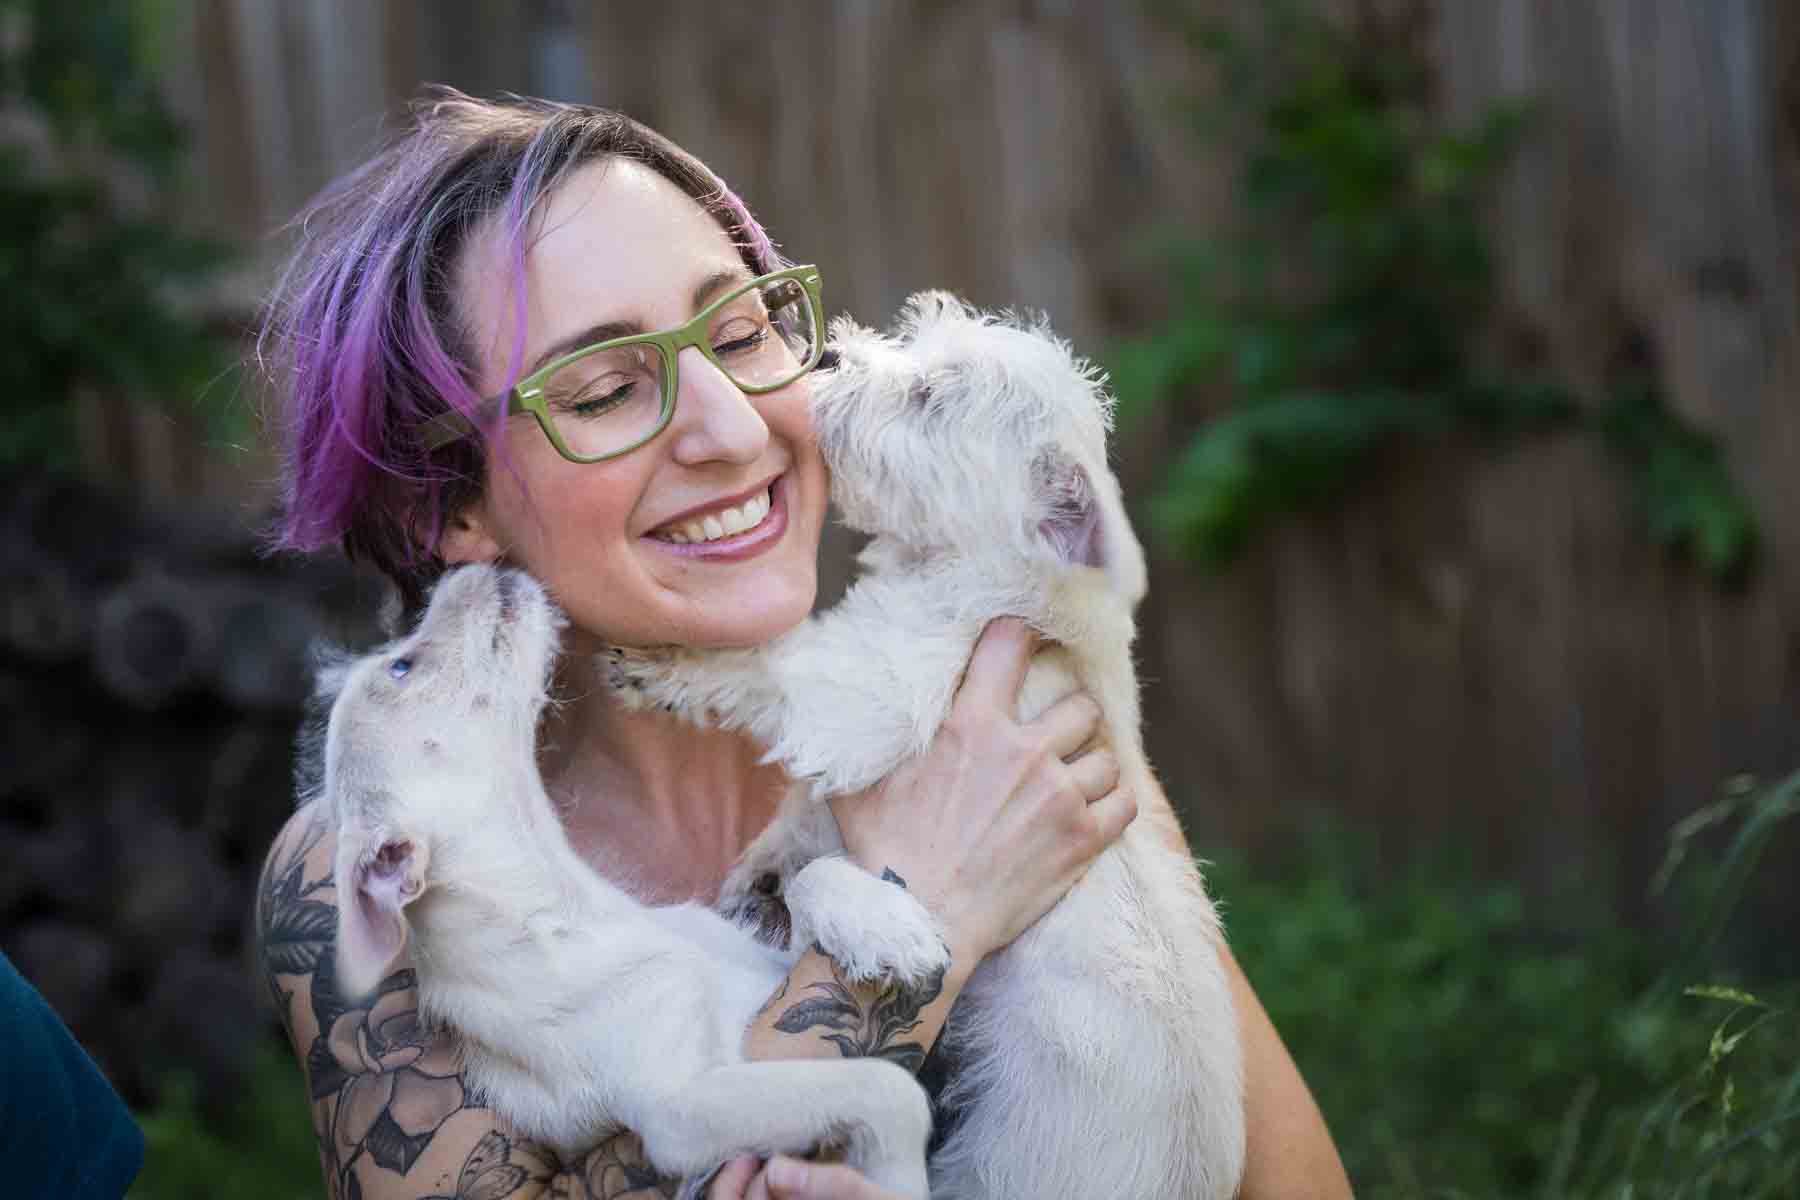 Woman with purple hair and glasses holding two puppies for an article on pet photo tips